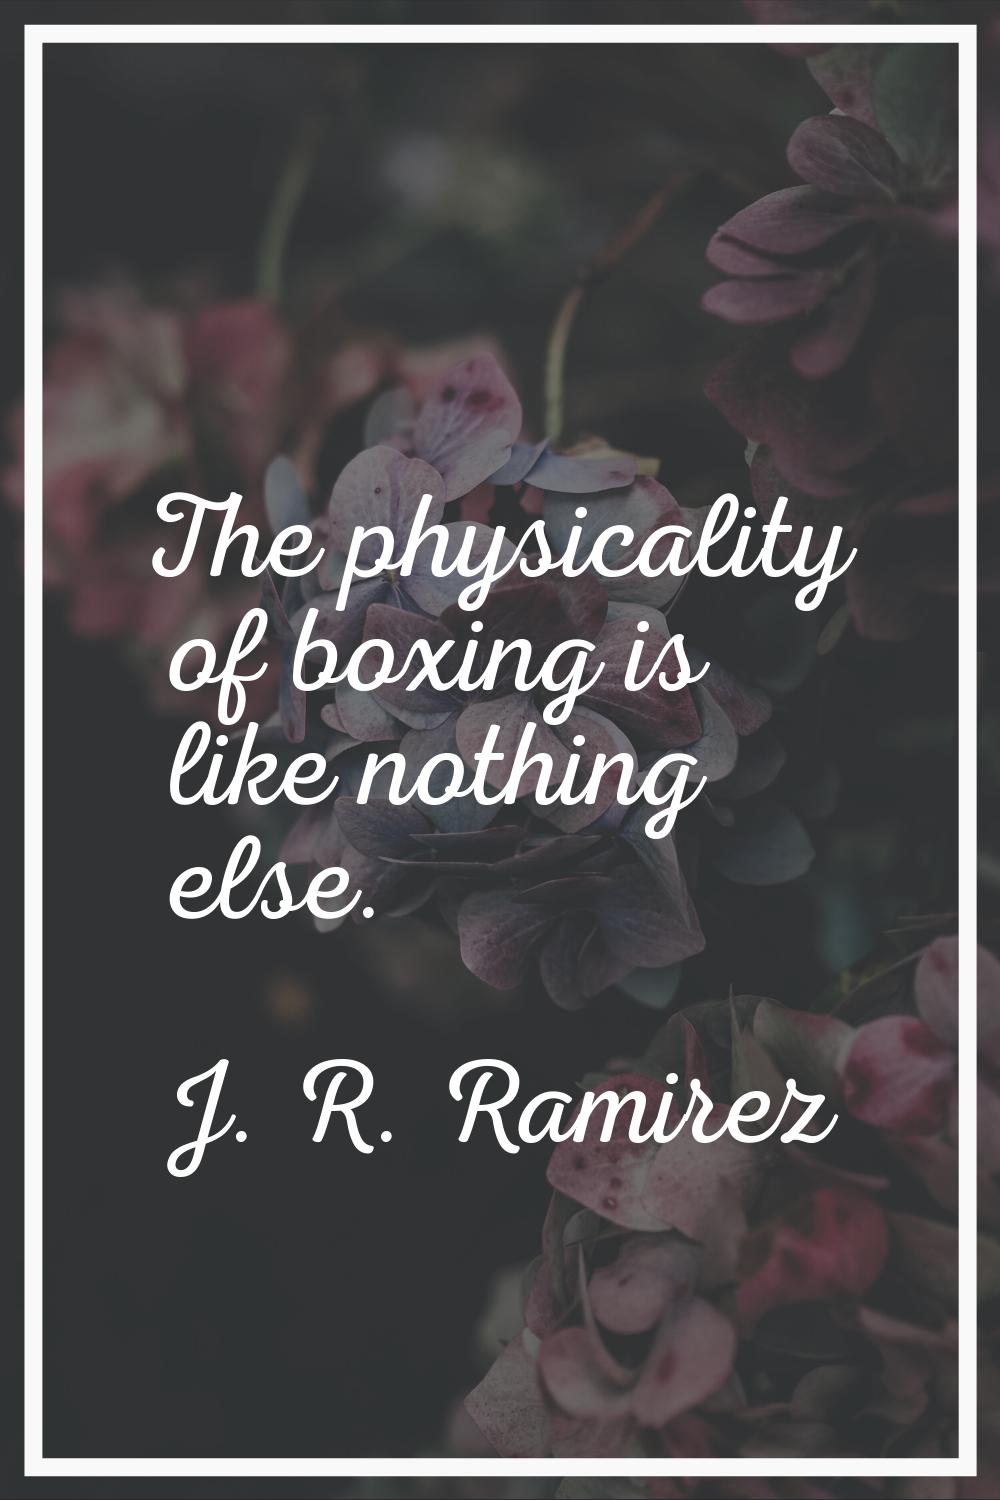 The physicality of boxing is like nothing else.